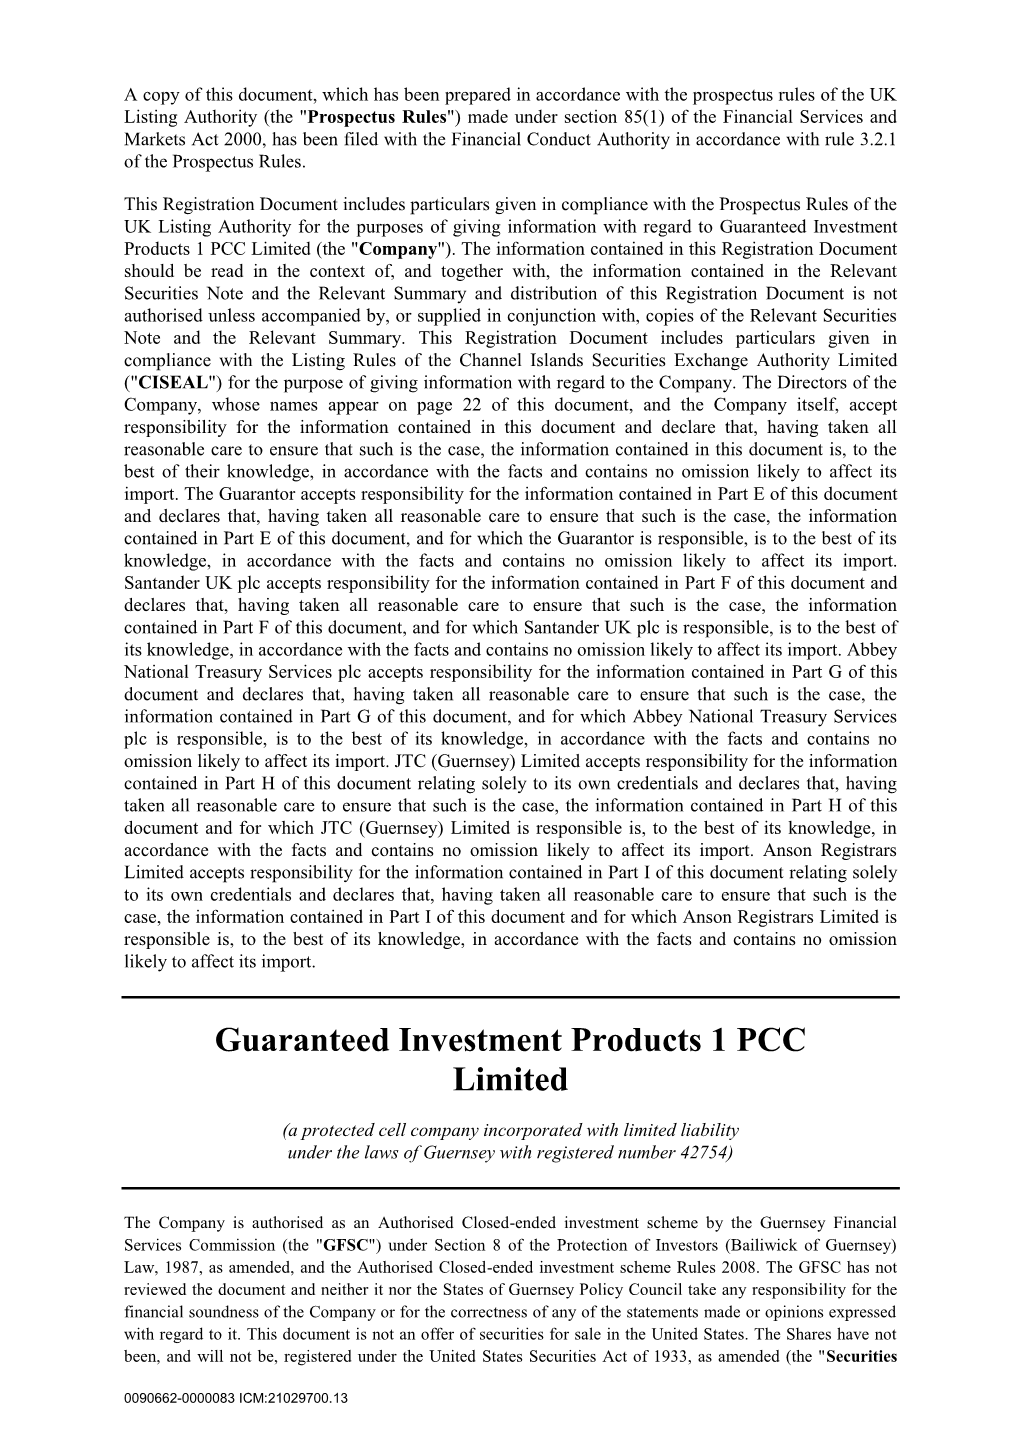 Guaranteed Investment Products 1 PCC Limited (The "Company")